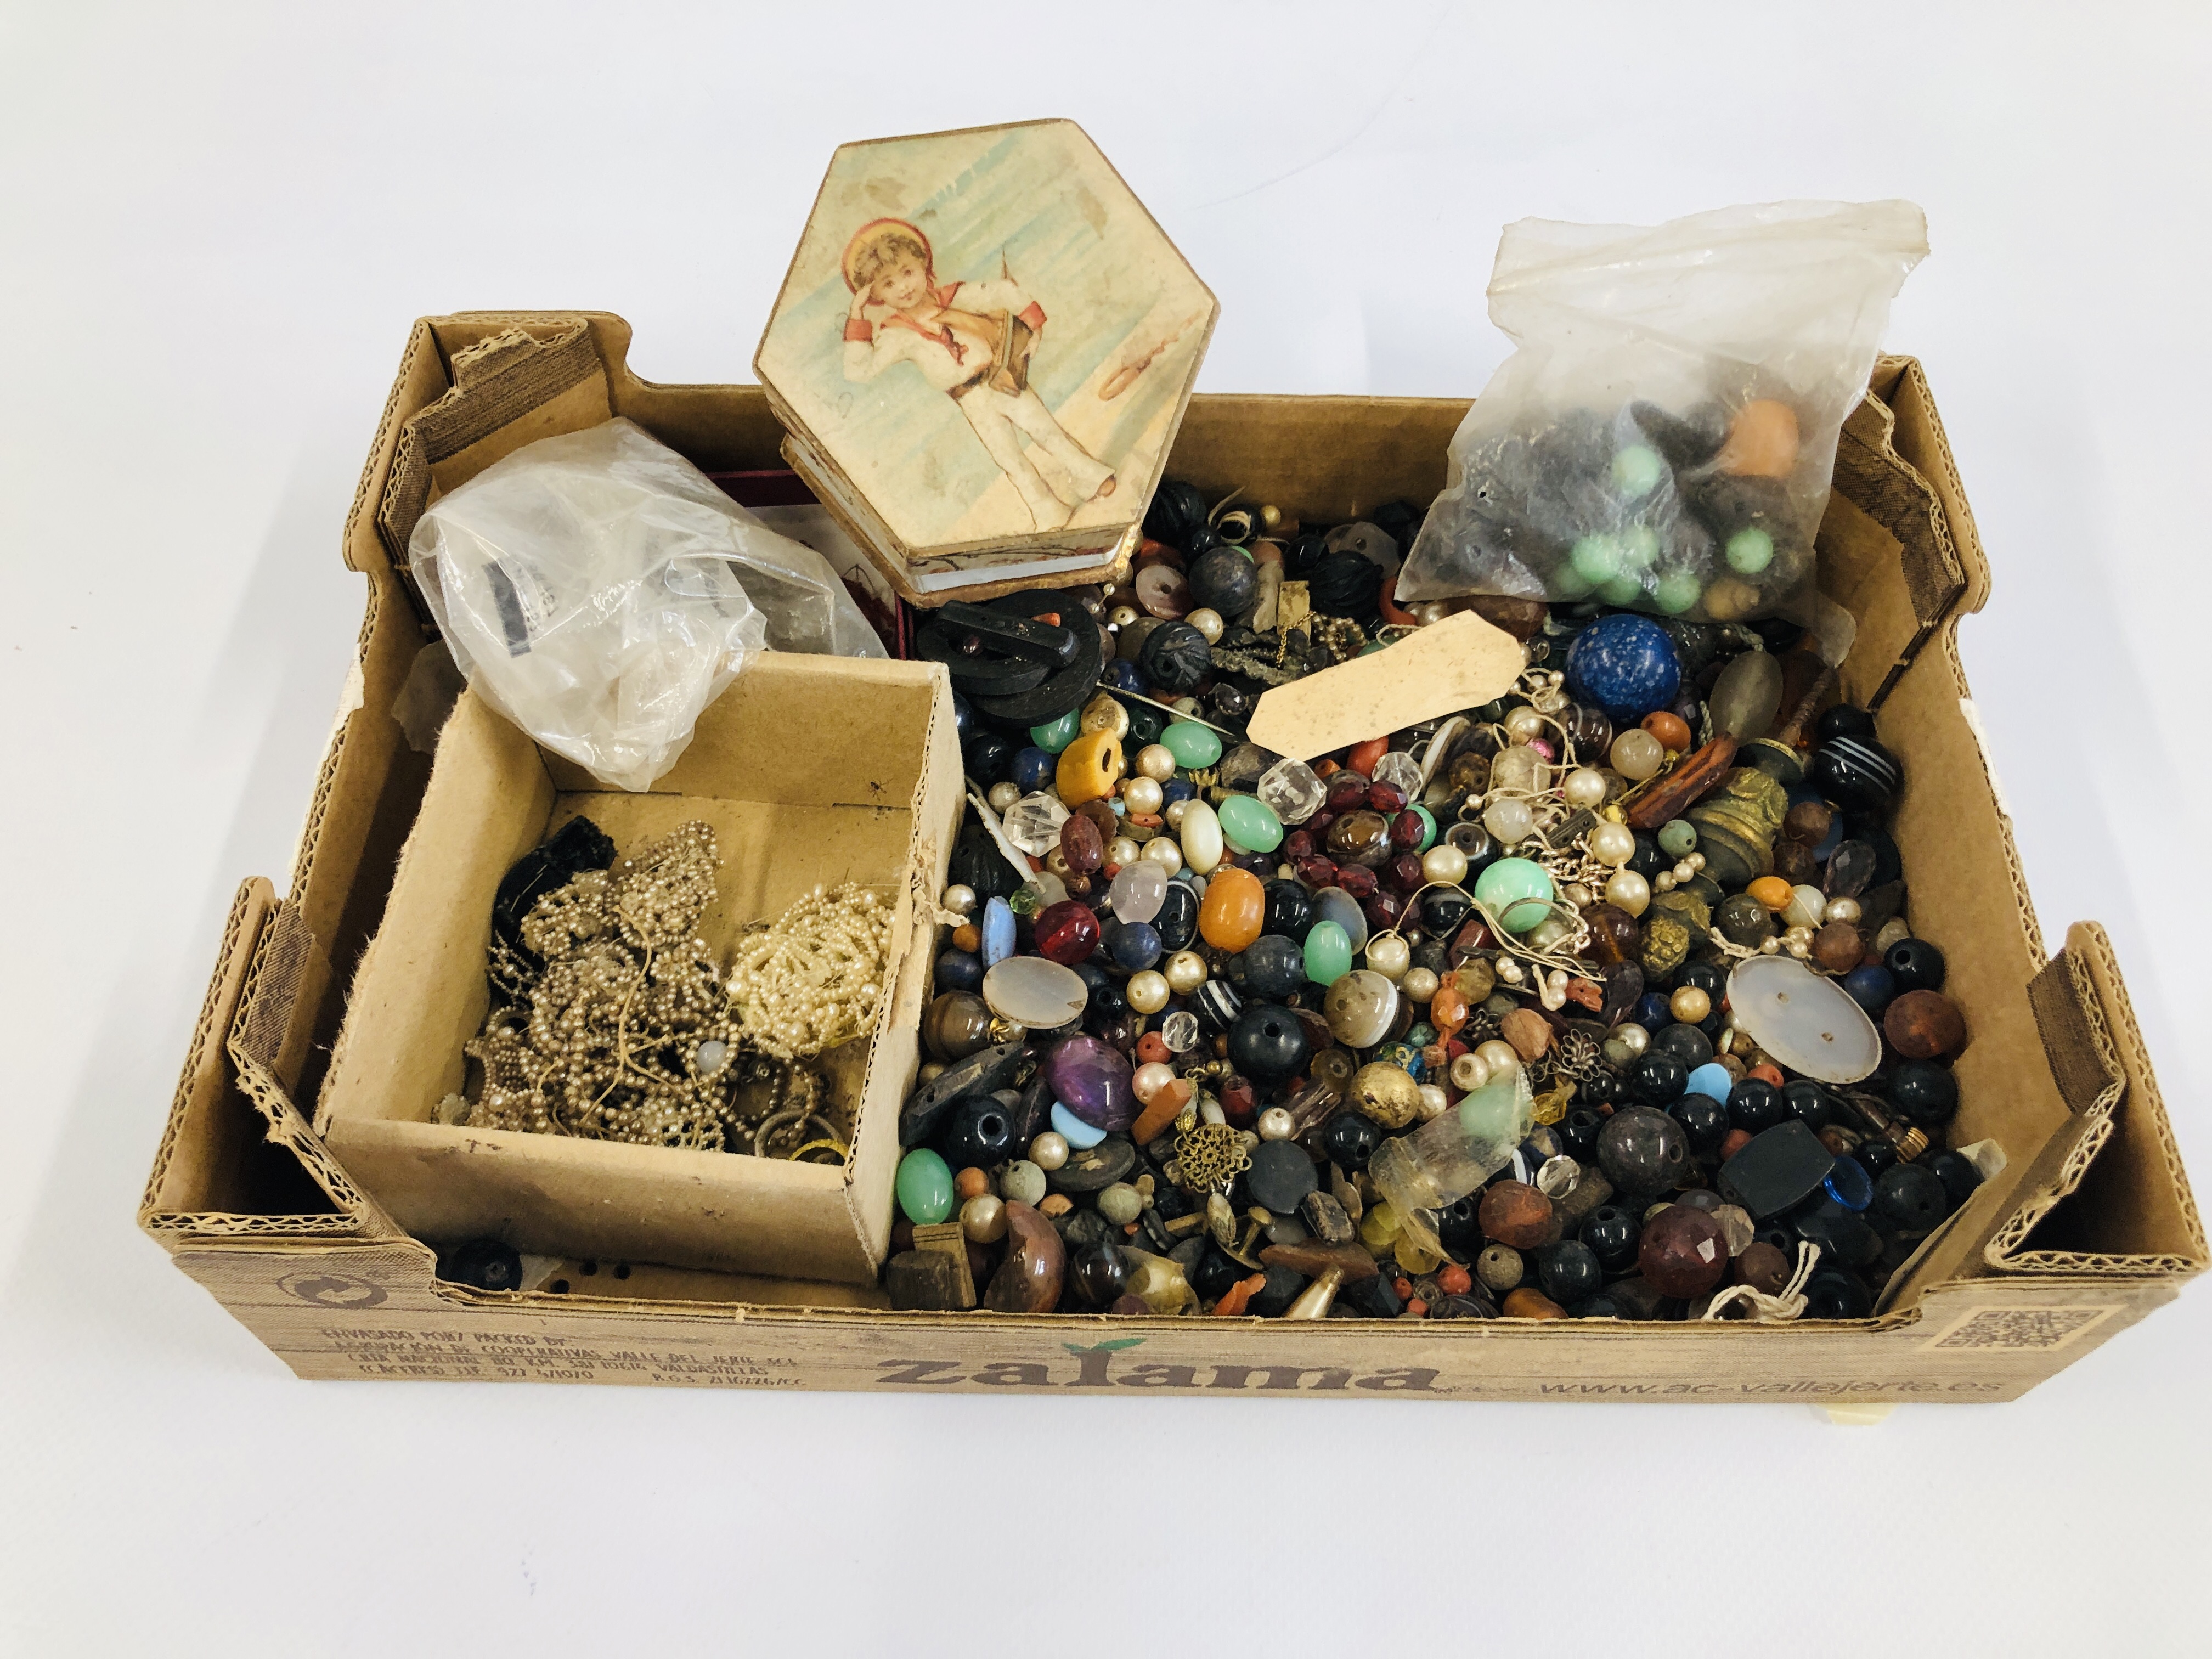 A TRAY CONTAINING AN EXTENSIVE COLLECTION OF ASSORTED BEADS AND POLISHED STONES ETC.